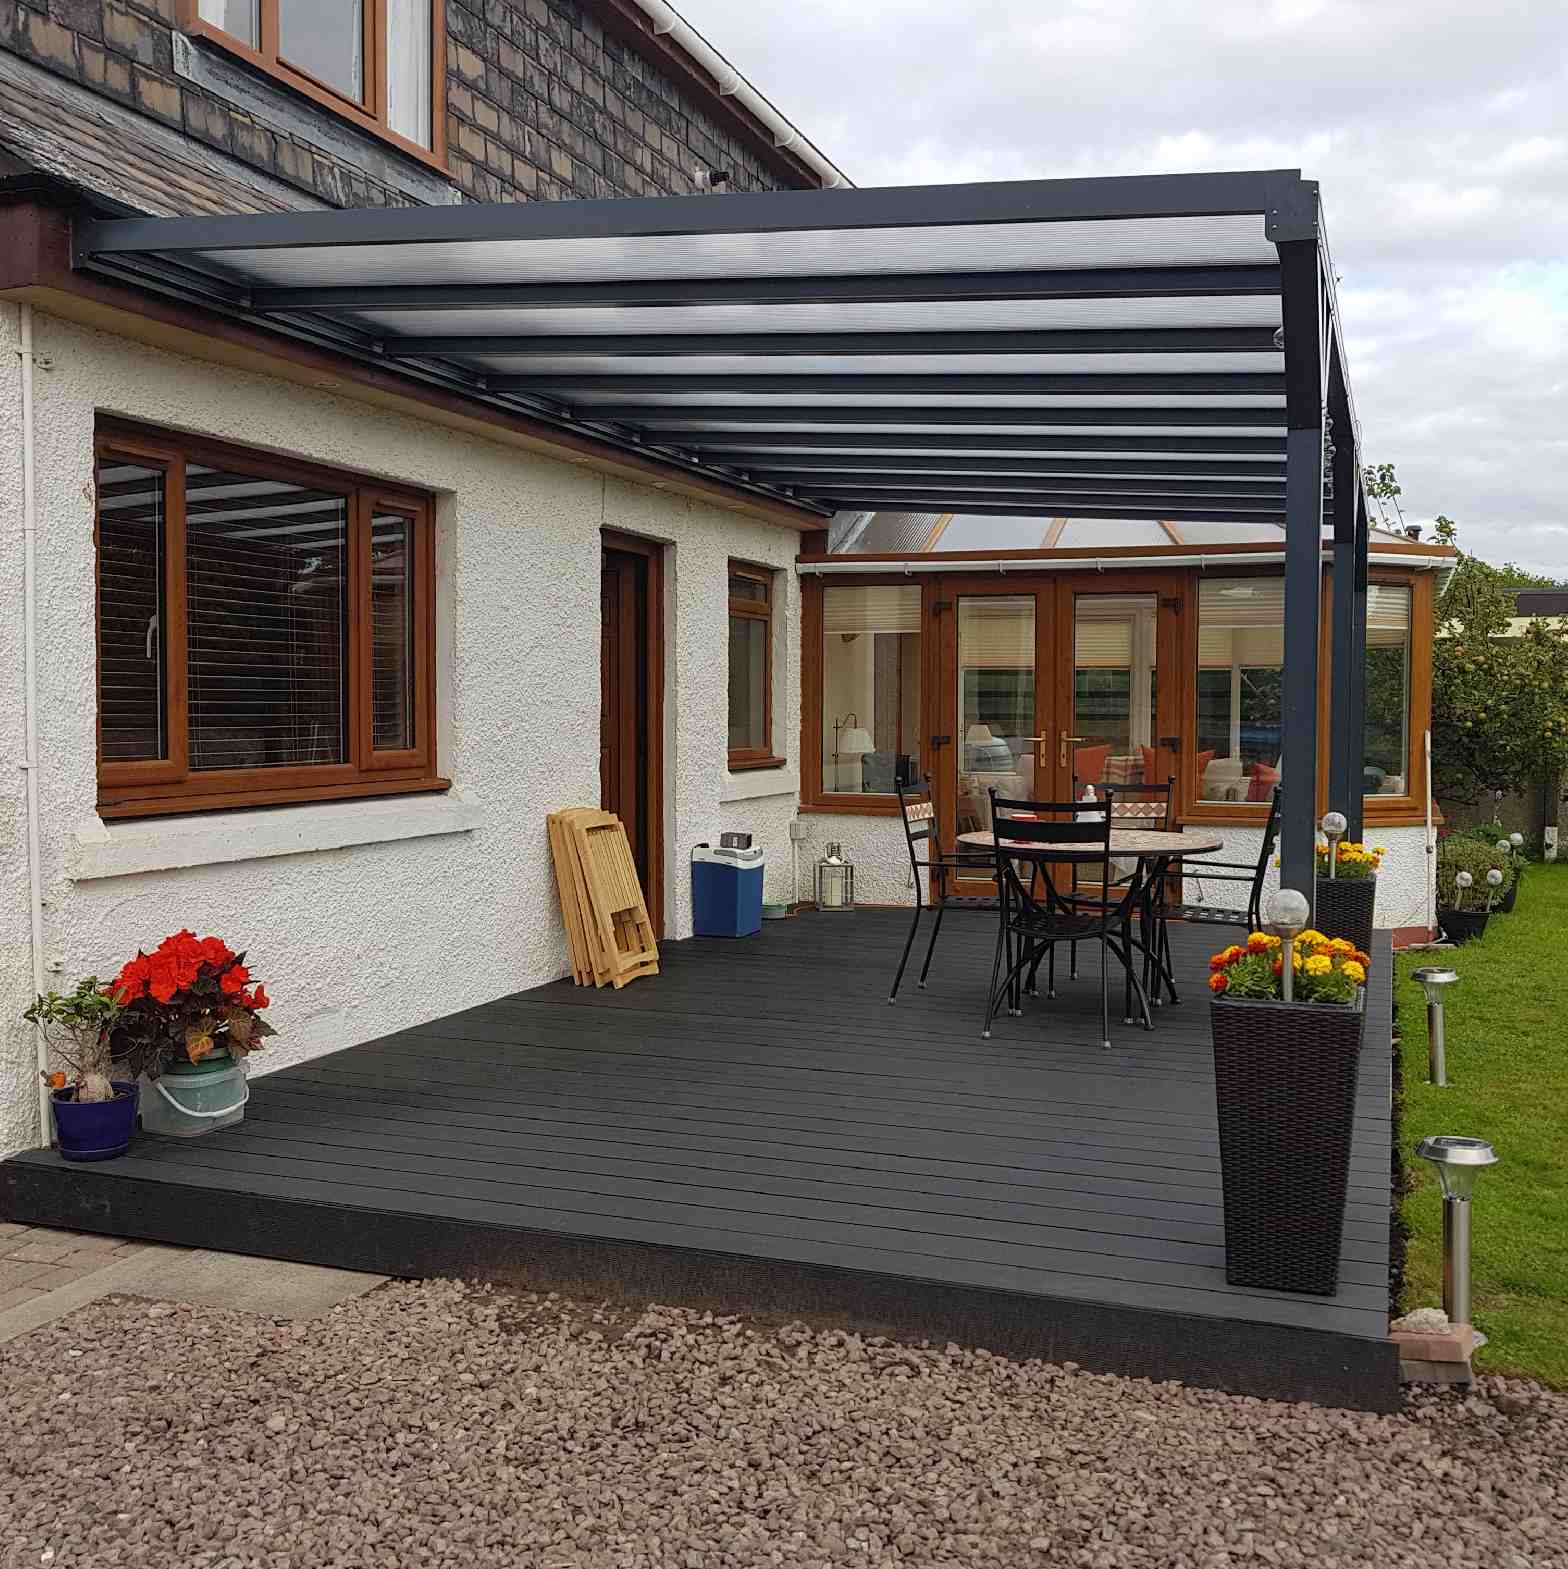 Buy Omega Verandah, Anthracite Grey, 16mm Polycarbonate Glazing - 8.4m (W) x 4.5m (P), (4) Supporting Posts online today